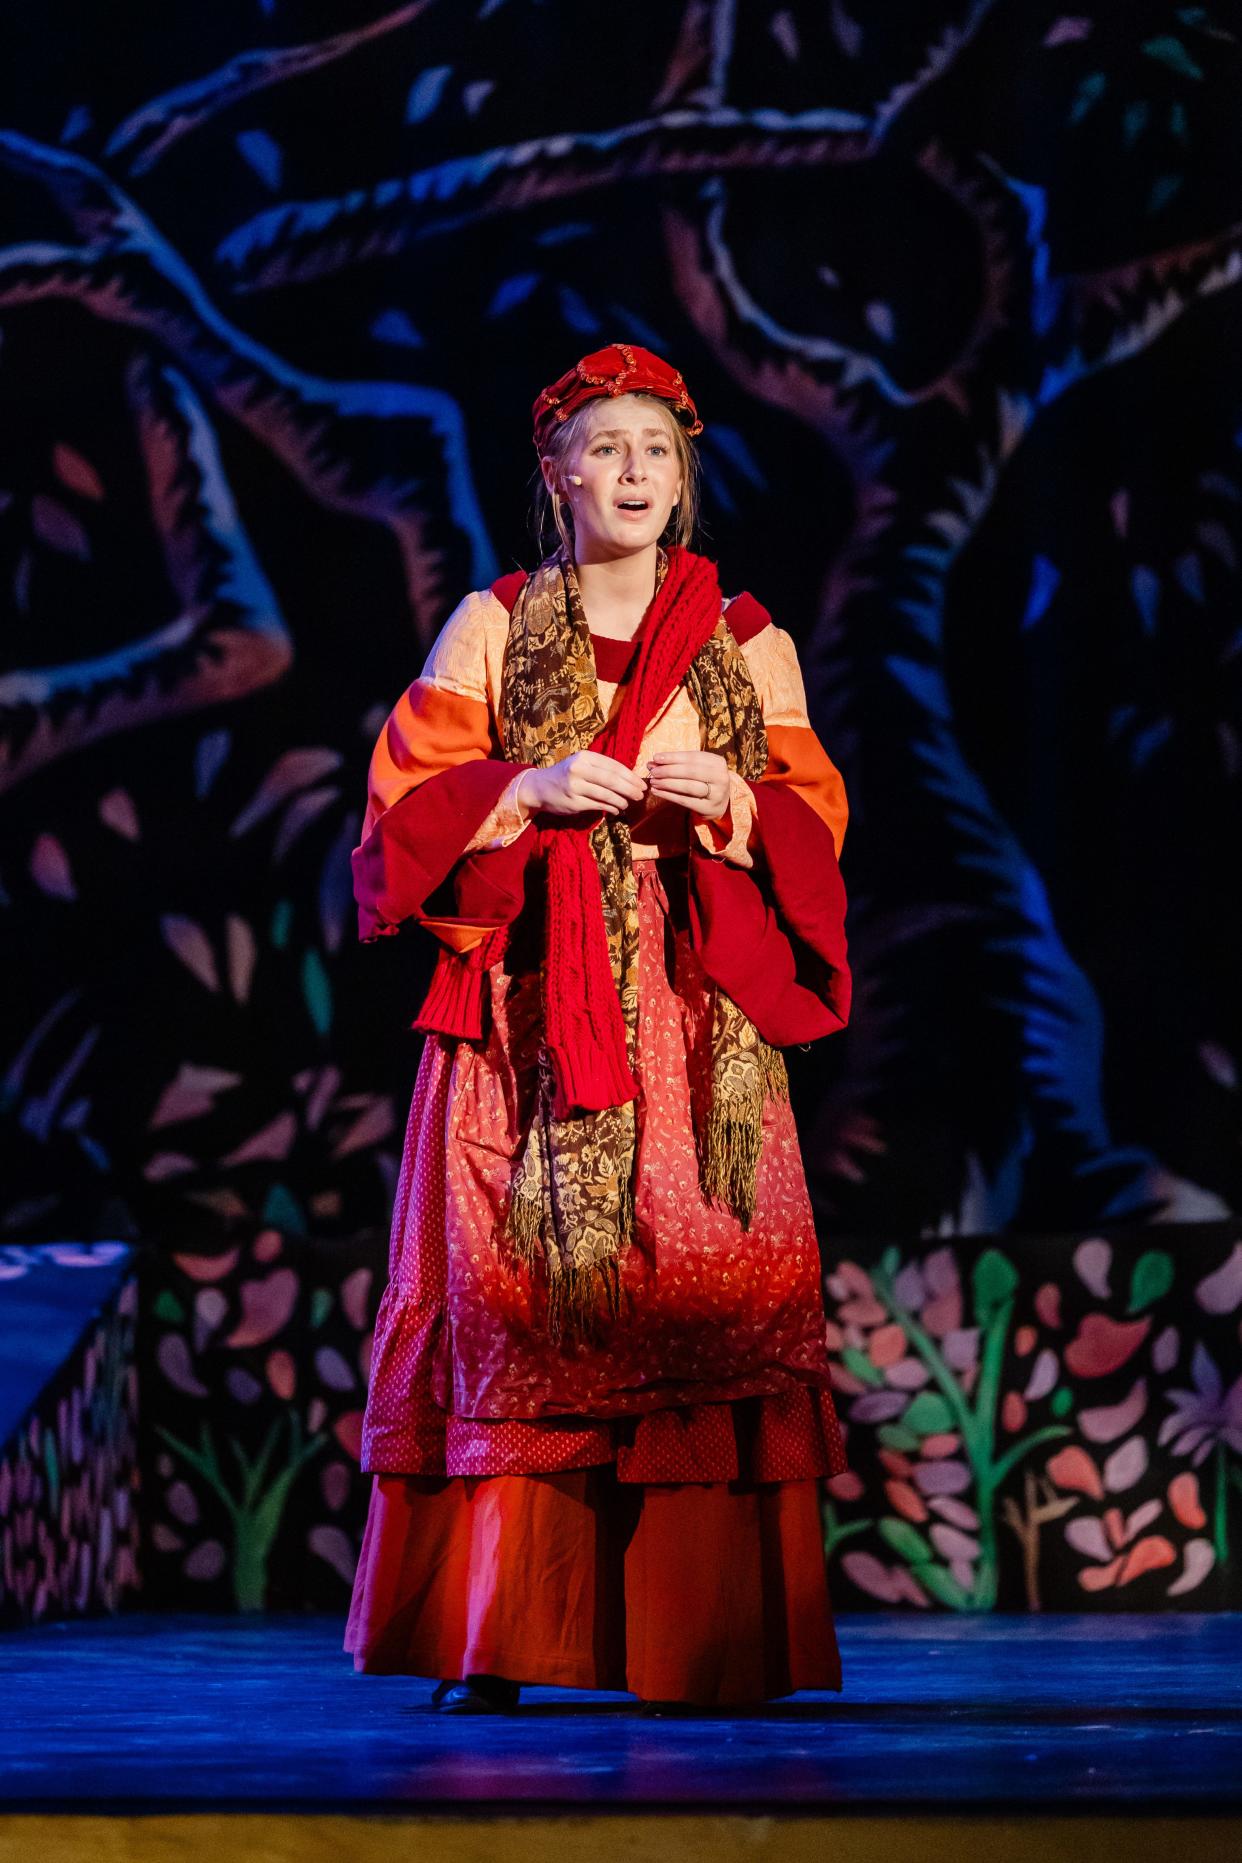 Lindsey Ross of Hudson High School was nominated for a best actress Dazzle Award for her role as the Baker's Wife in "Into the Woods."